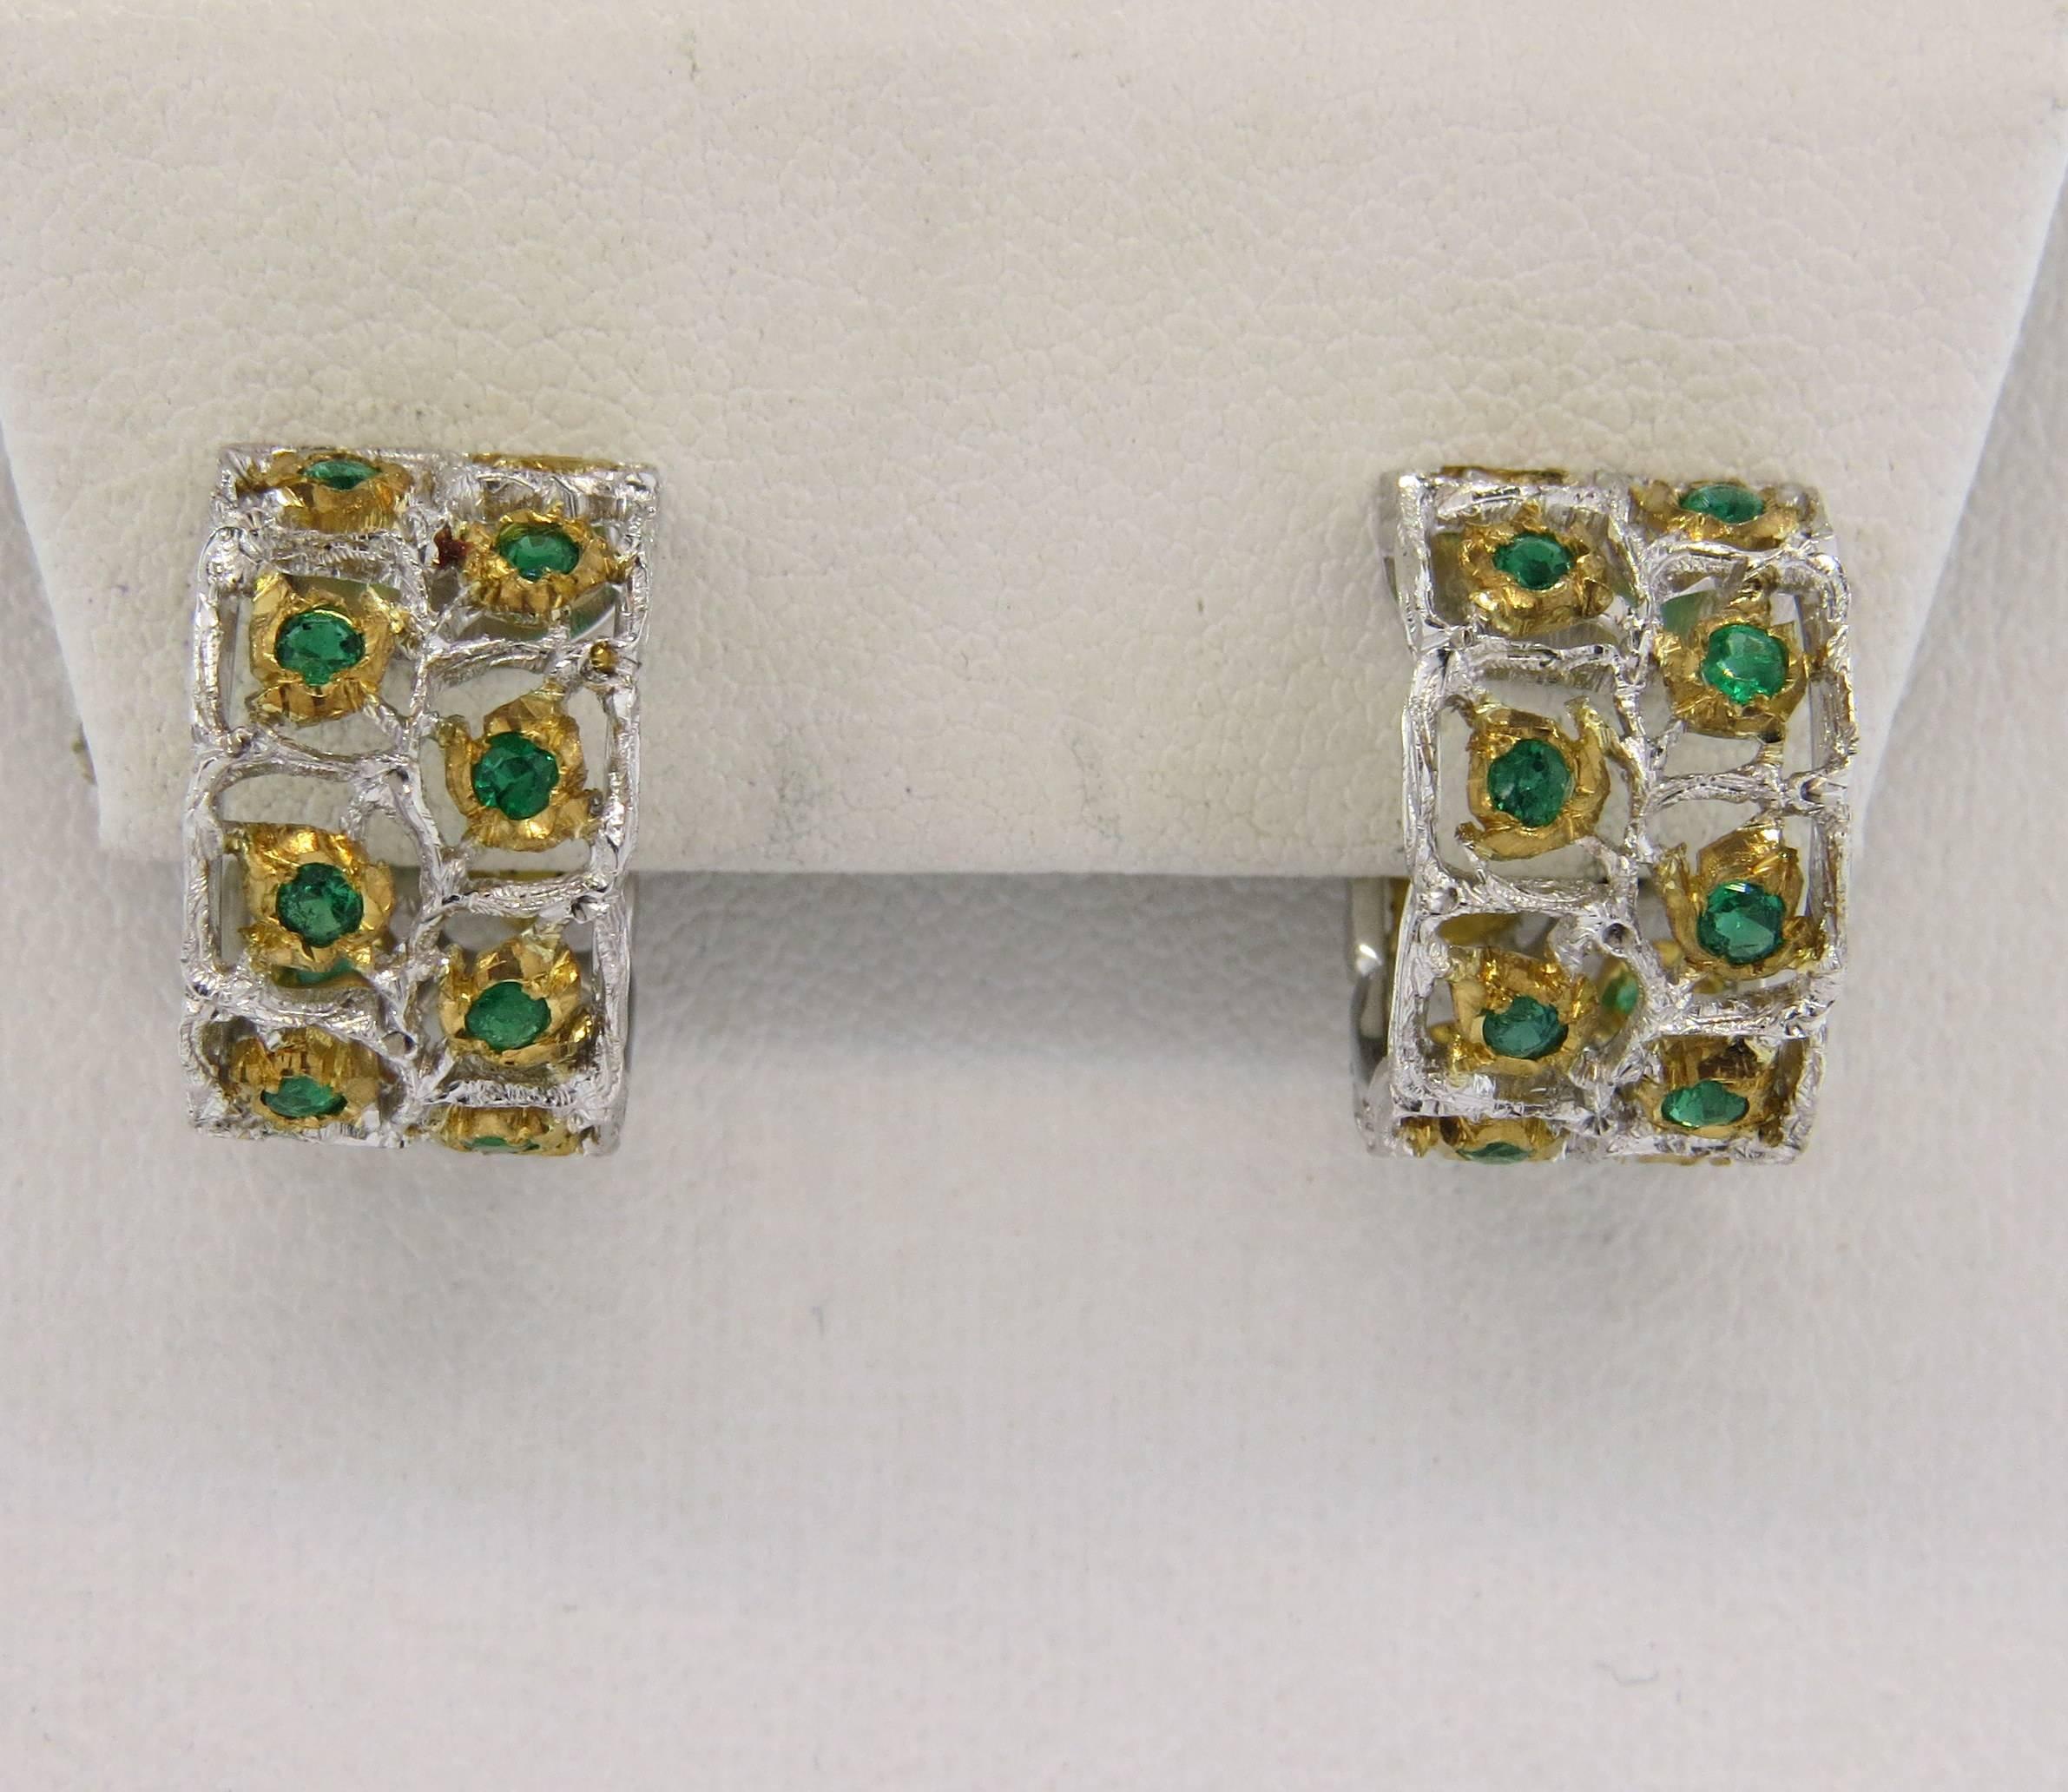 A pair of 18k white and yellow gold hoops, crafted by Buccellati, set with 0.66ctw in emeralds. Earrings are 17mm in diameter x 10.5mm wide. Marked: Buccellati Italy 18k. Weight - 10 grams
Come with original Buccellati paperwork